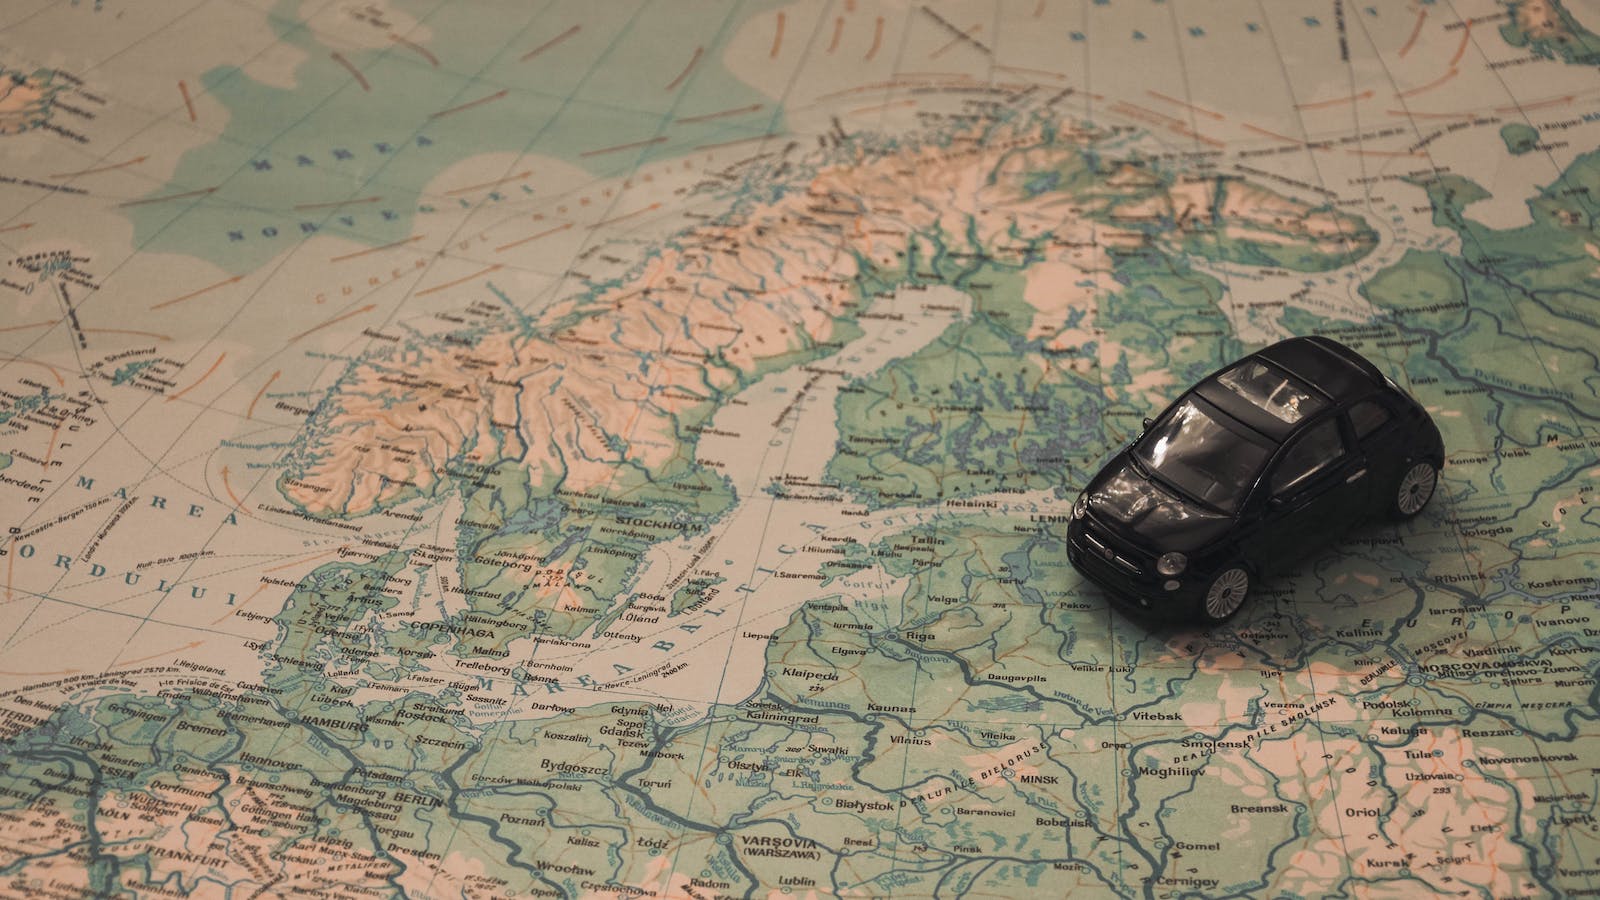 Toy car on map of Europe